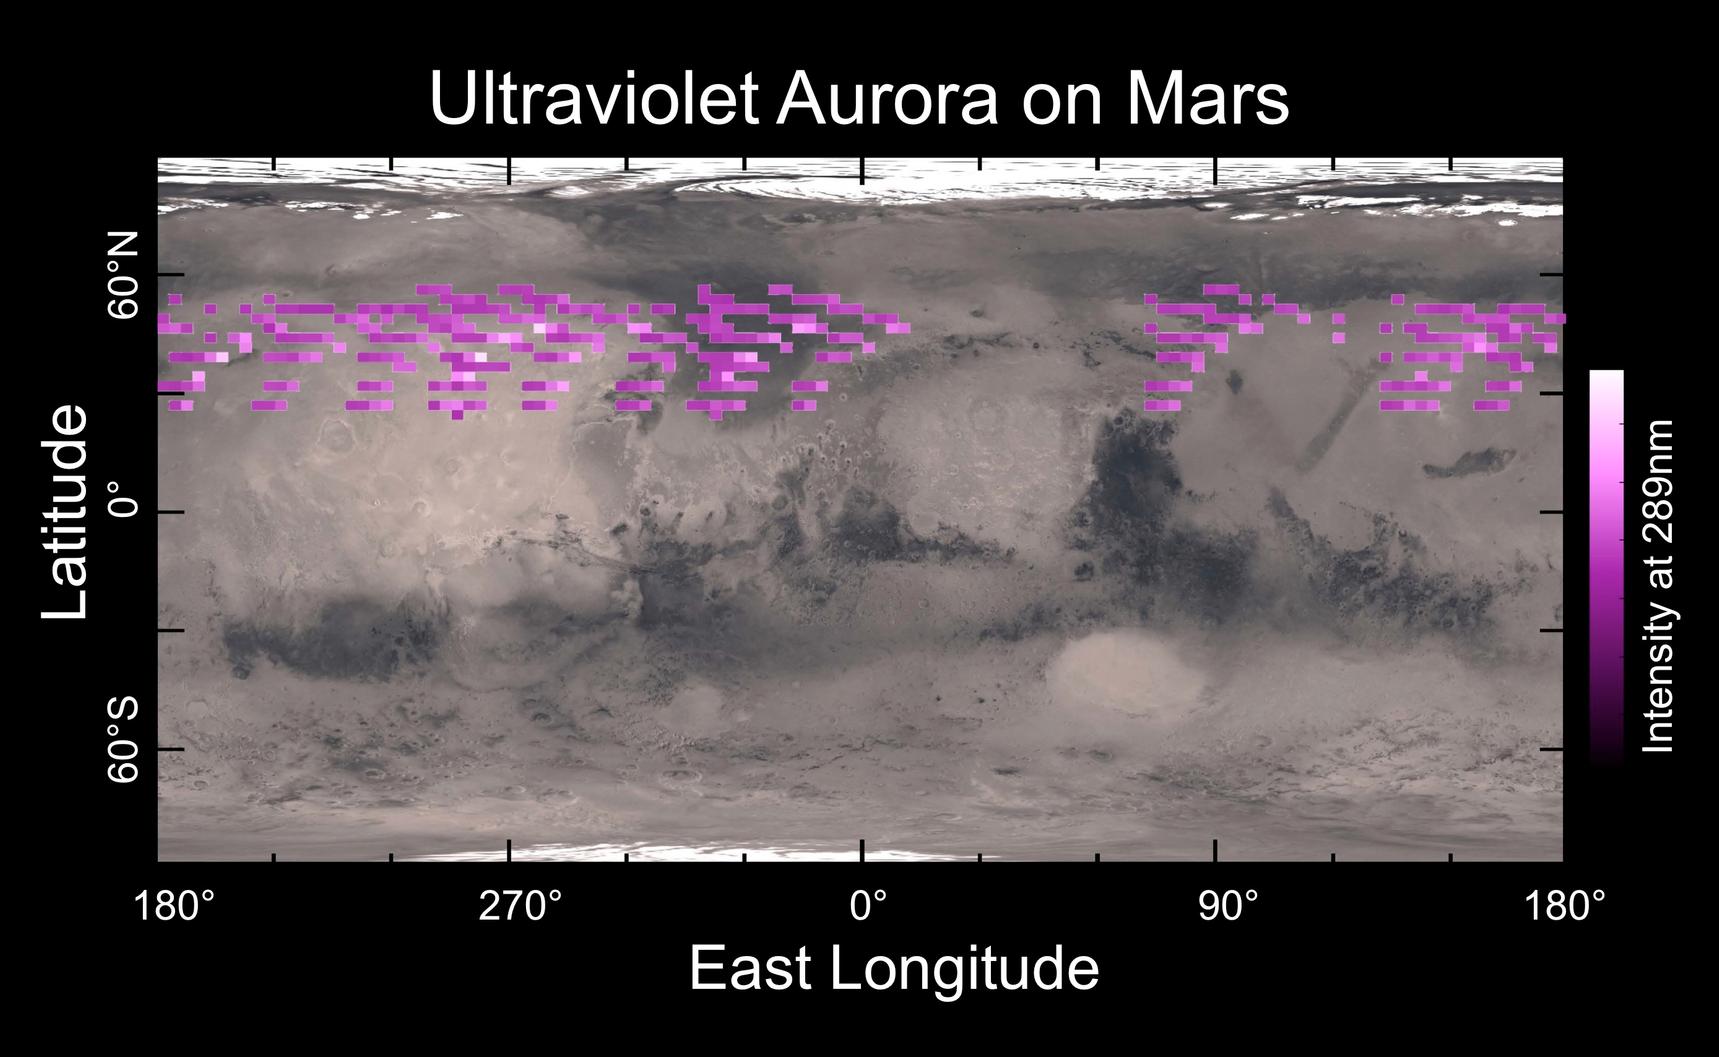 A map of MAVEN's Imaging Ultraviolet Spectrograph (IUVS) auroral detections in December 2014 overlaid on Mars' surface.